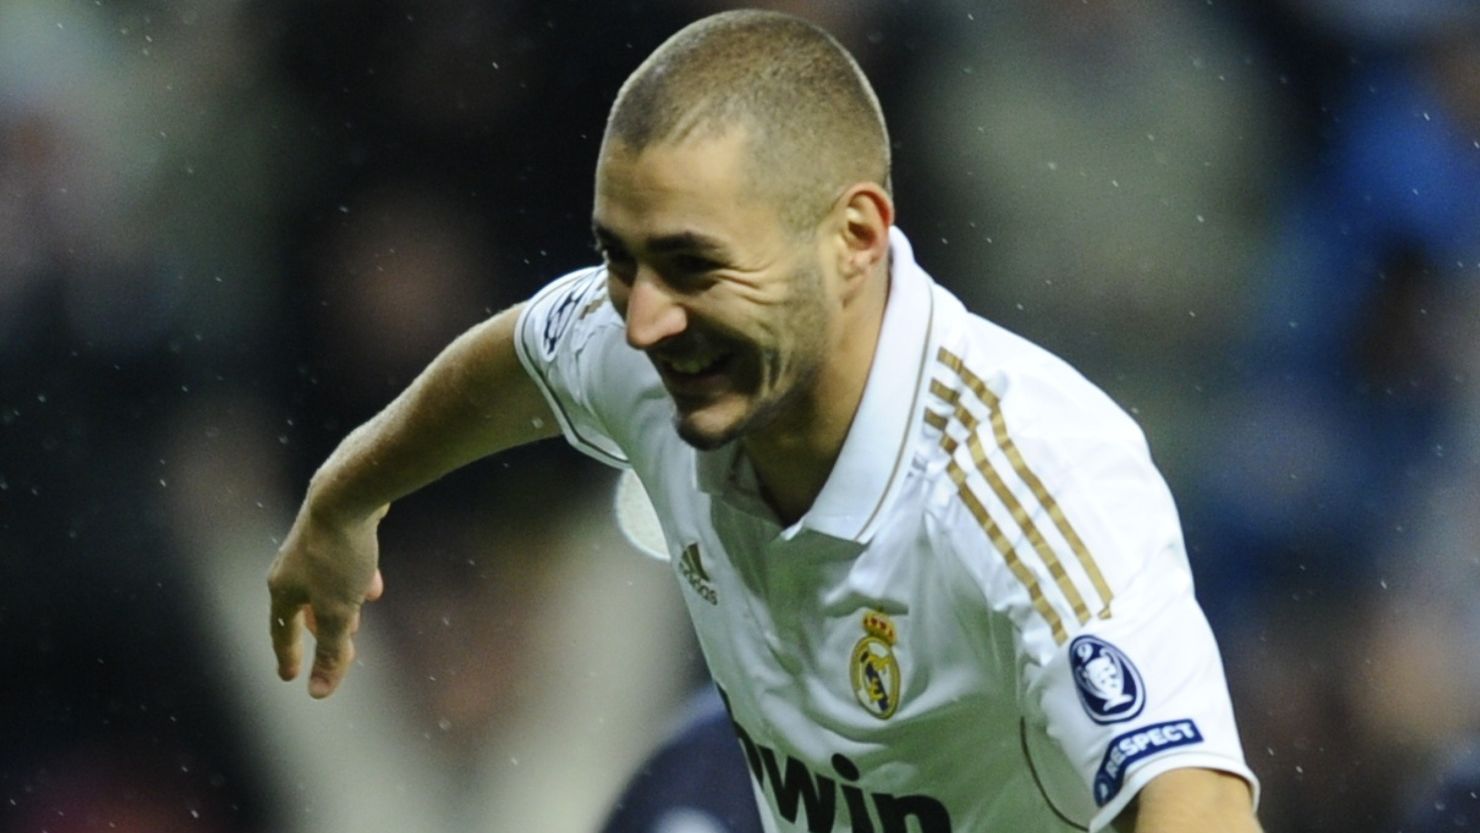 Karim Benzema signed for Real Madrid from French team Lyon in 2009.